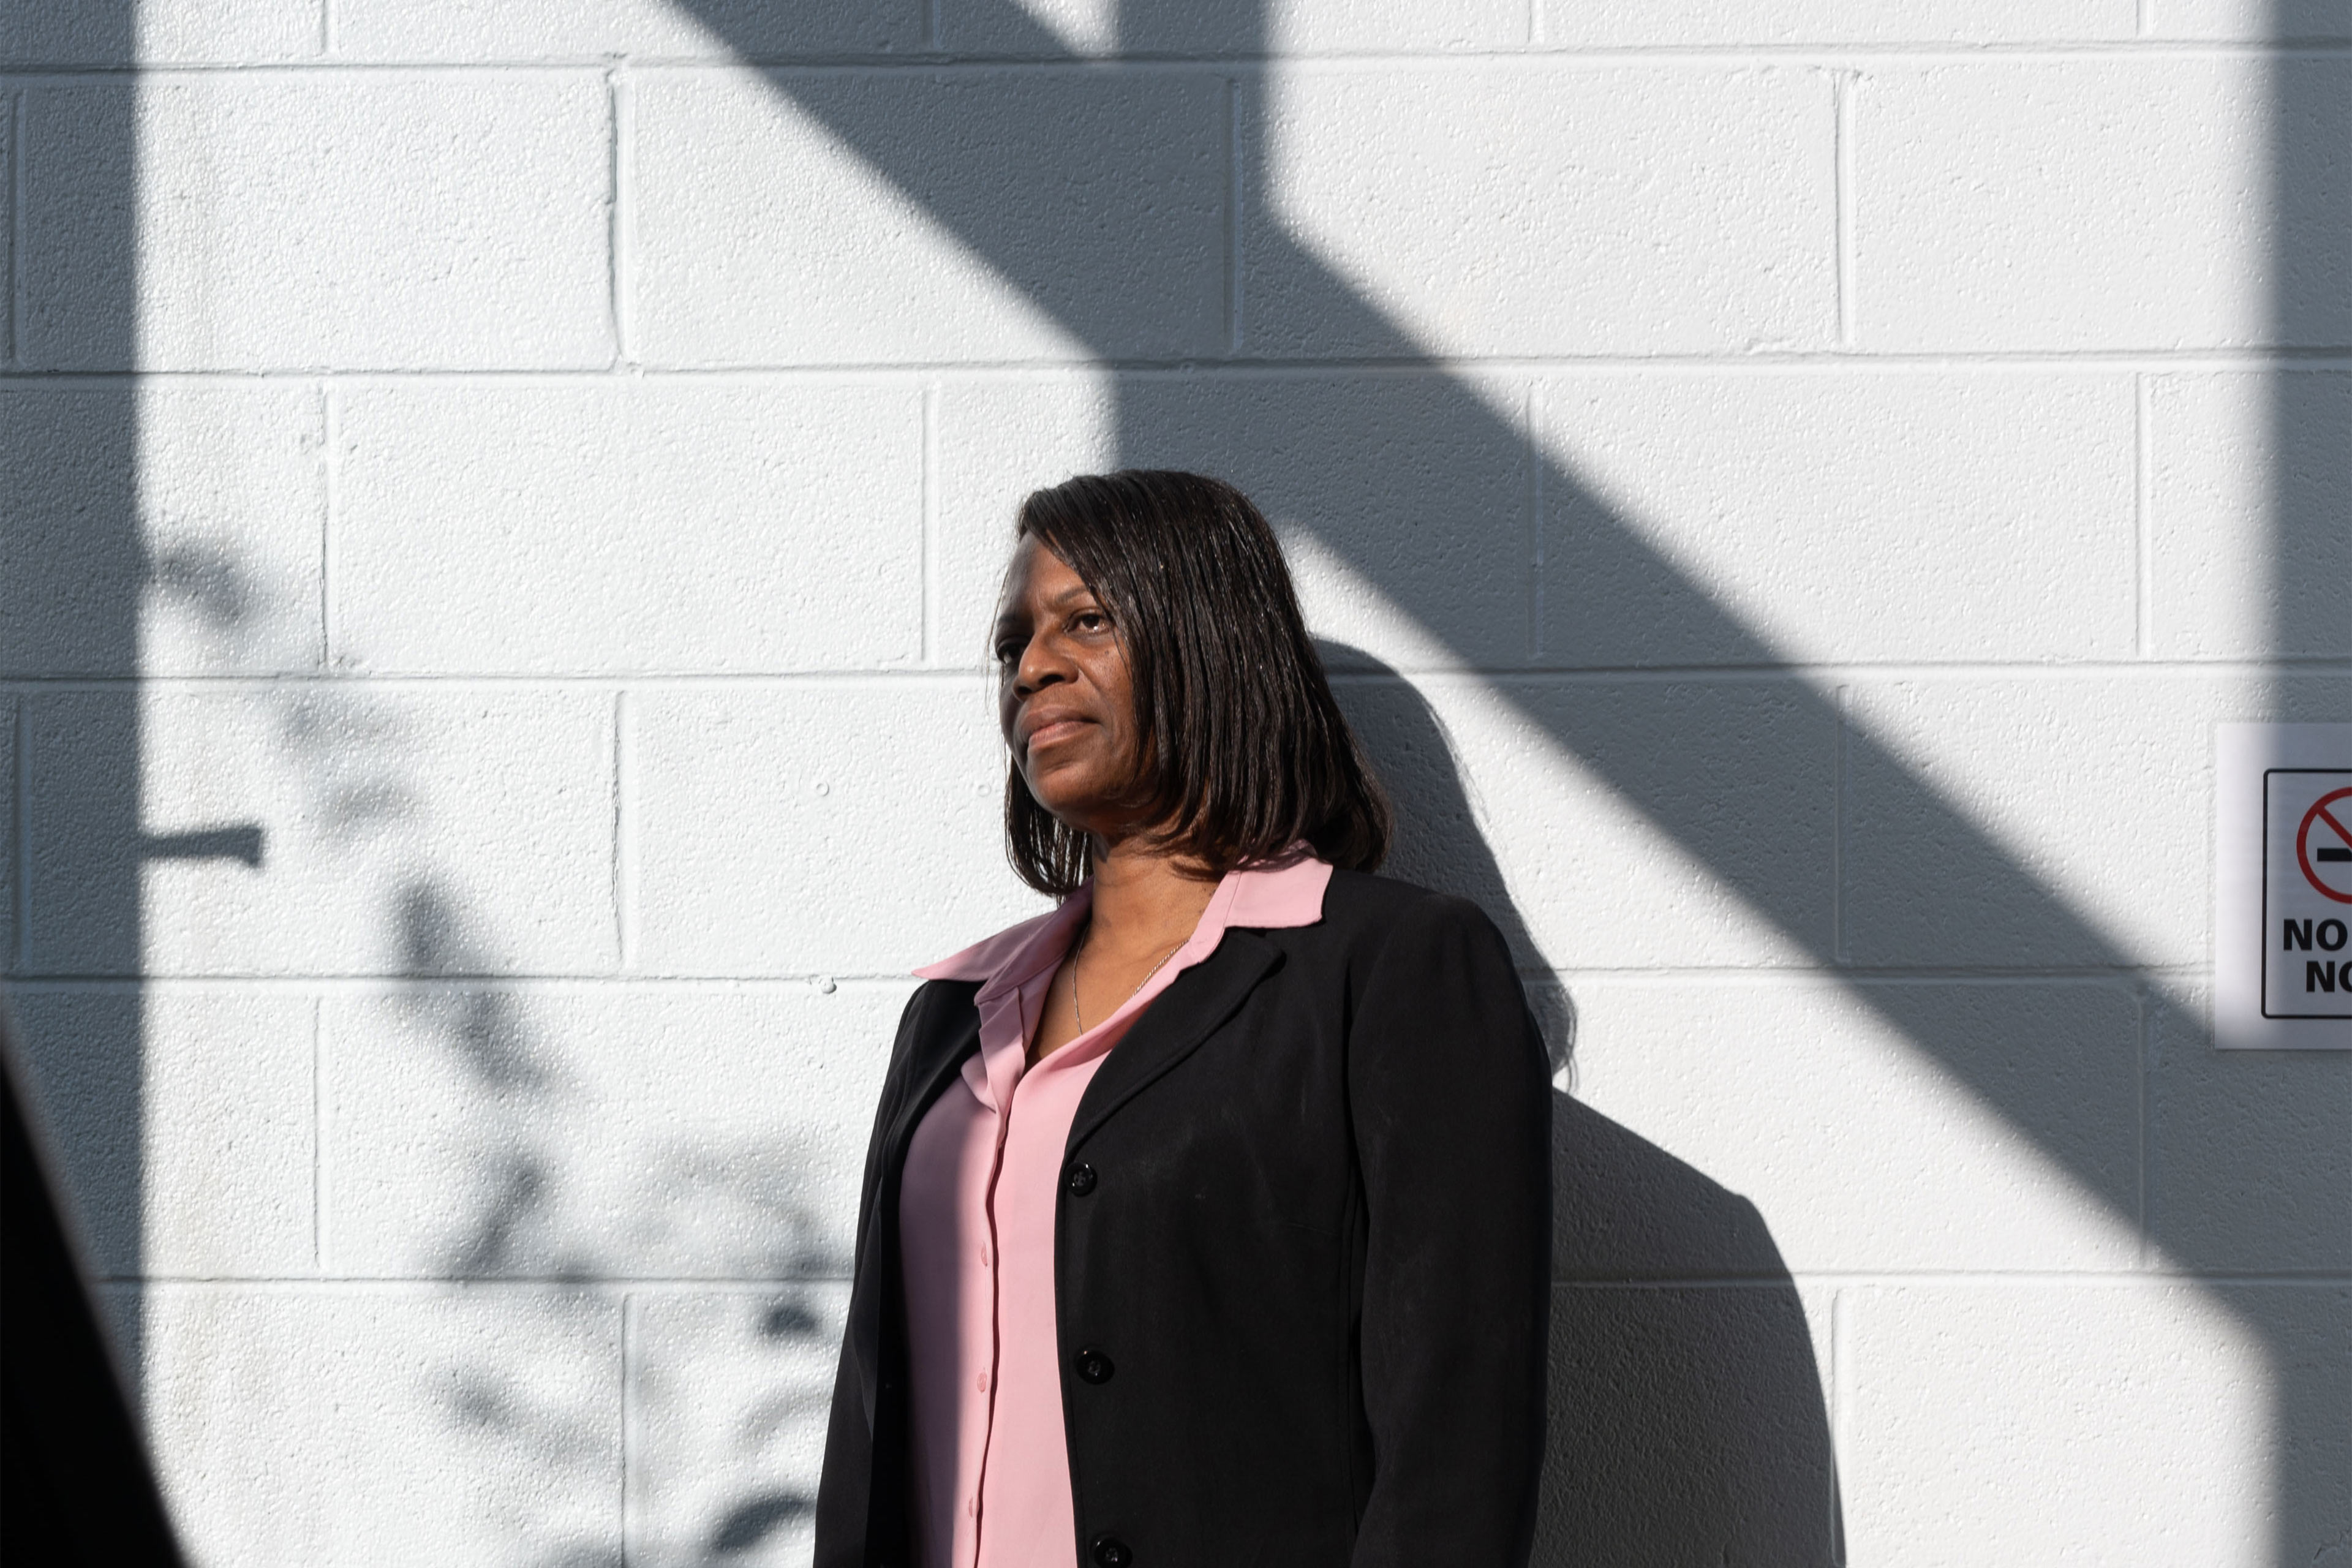 A photo shows Monica Reed standing outside against a white wall.